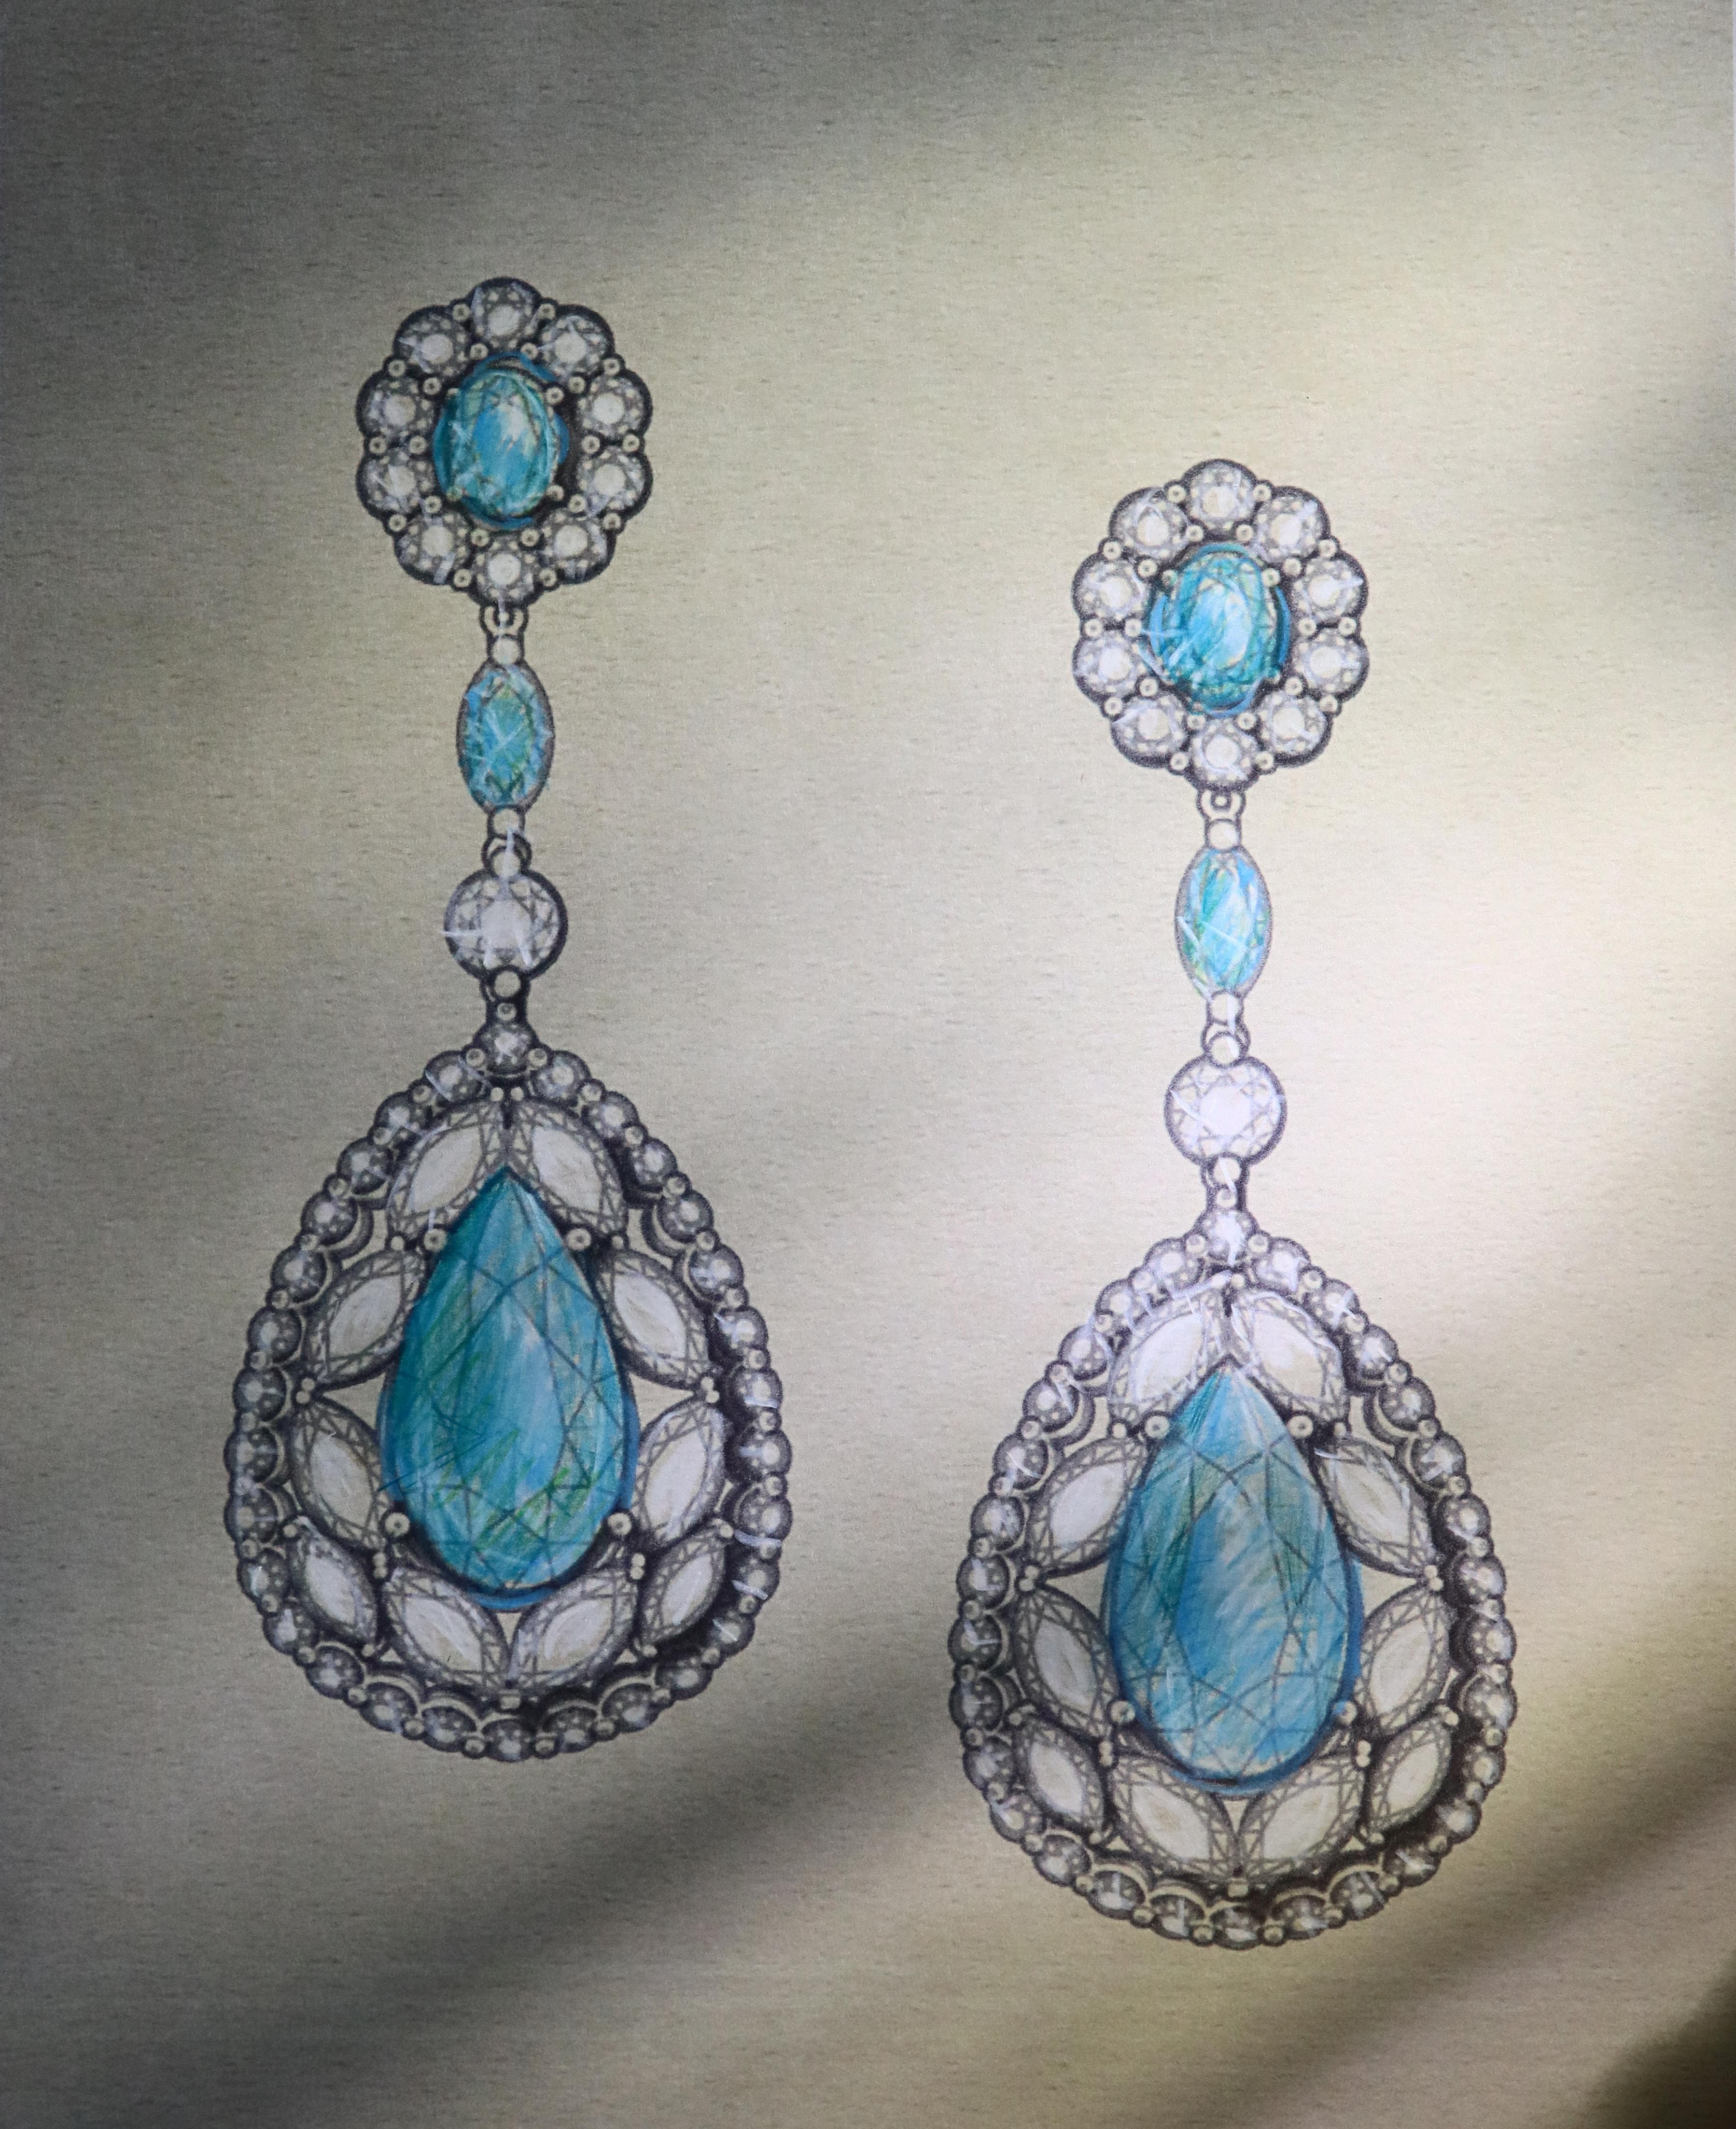 Beautiful one-of-a-kind earrings by our award-winning designer, Robert Pelliccia. These custom earrings feature two pear shaped Mozambique Paraiba Tourmalines (3.60ctw) alongside oval shaped rare Brazilian Paraiba Tourmaline (.62ctw) for ultimate